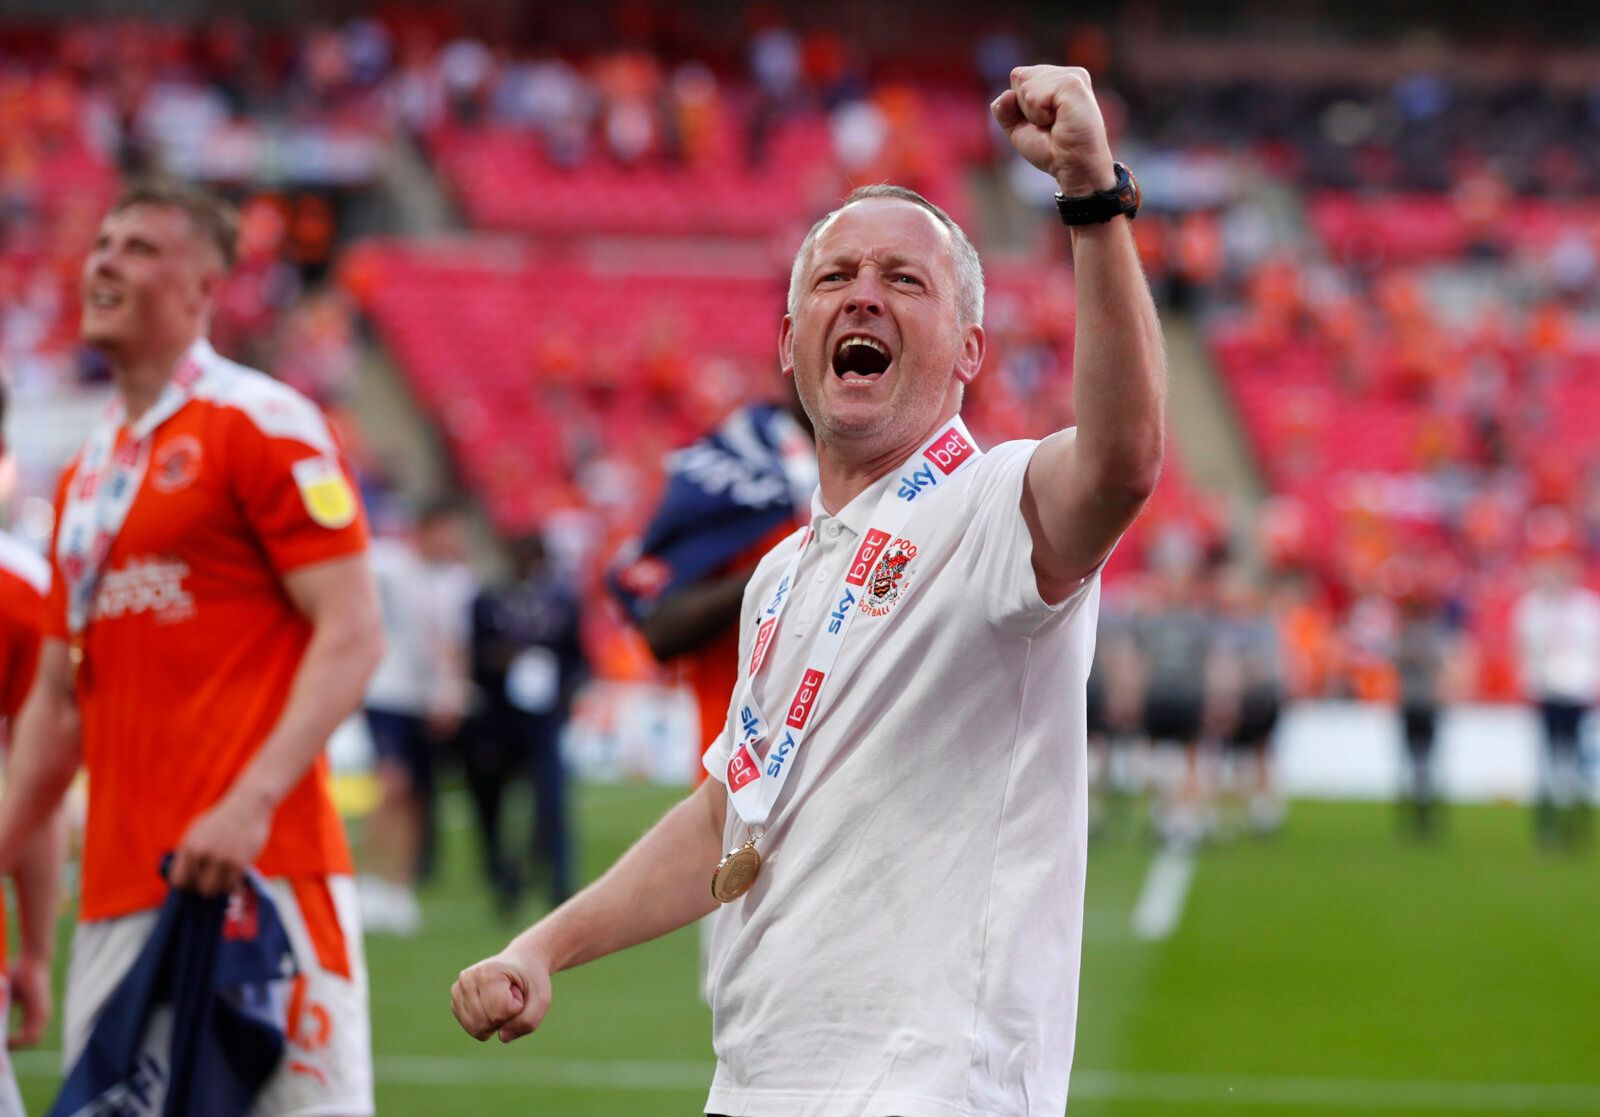 Soccer Football - League One Play-Off Final - Blackpool v Lincoln City - Wembley Stadium, London, Britain - May 30, 2021 Blackpool manager Neil Critchley celebrates after winning the League One Play-Off Final Action Images/Lee Smith EDITORIAL USE ONLY. No use with unauthorized audio, video, data, fixture lists, club/league logos or 'live' services. Online in-match use limited to 75 images, no video emulation. No use in betting, games or single club /league/player publications.  Please contact yo